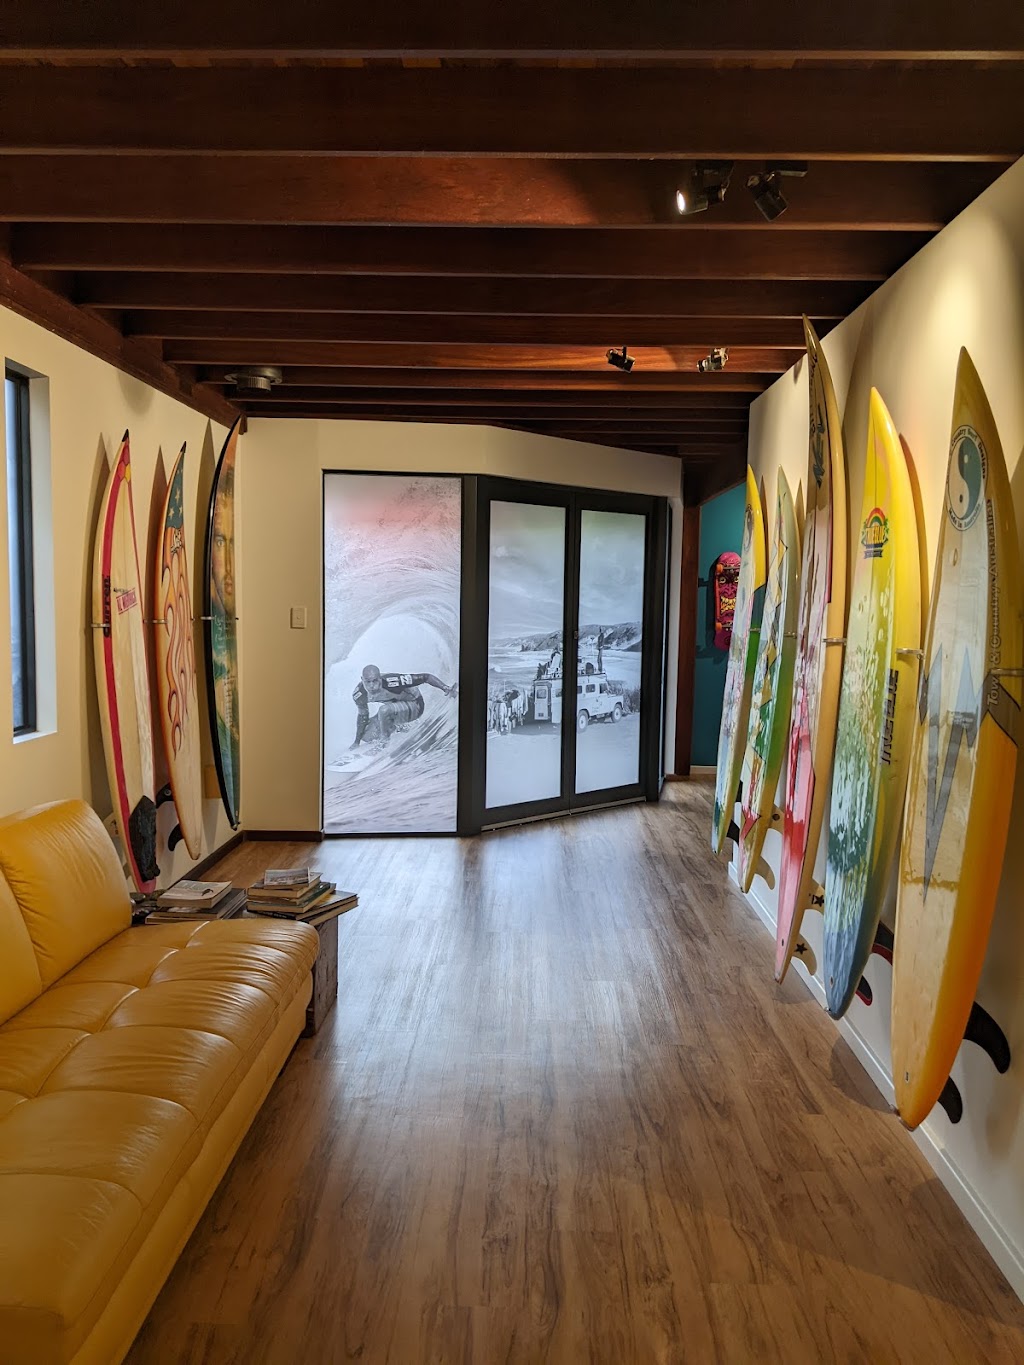 The Surf Gallery | 50750 South Coast Hwy, Youngs Siding WA 6330, Australia | Phone: 0417 956 640